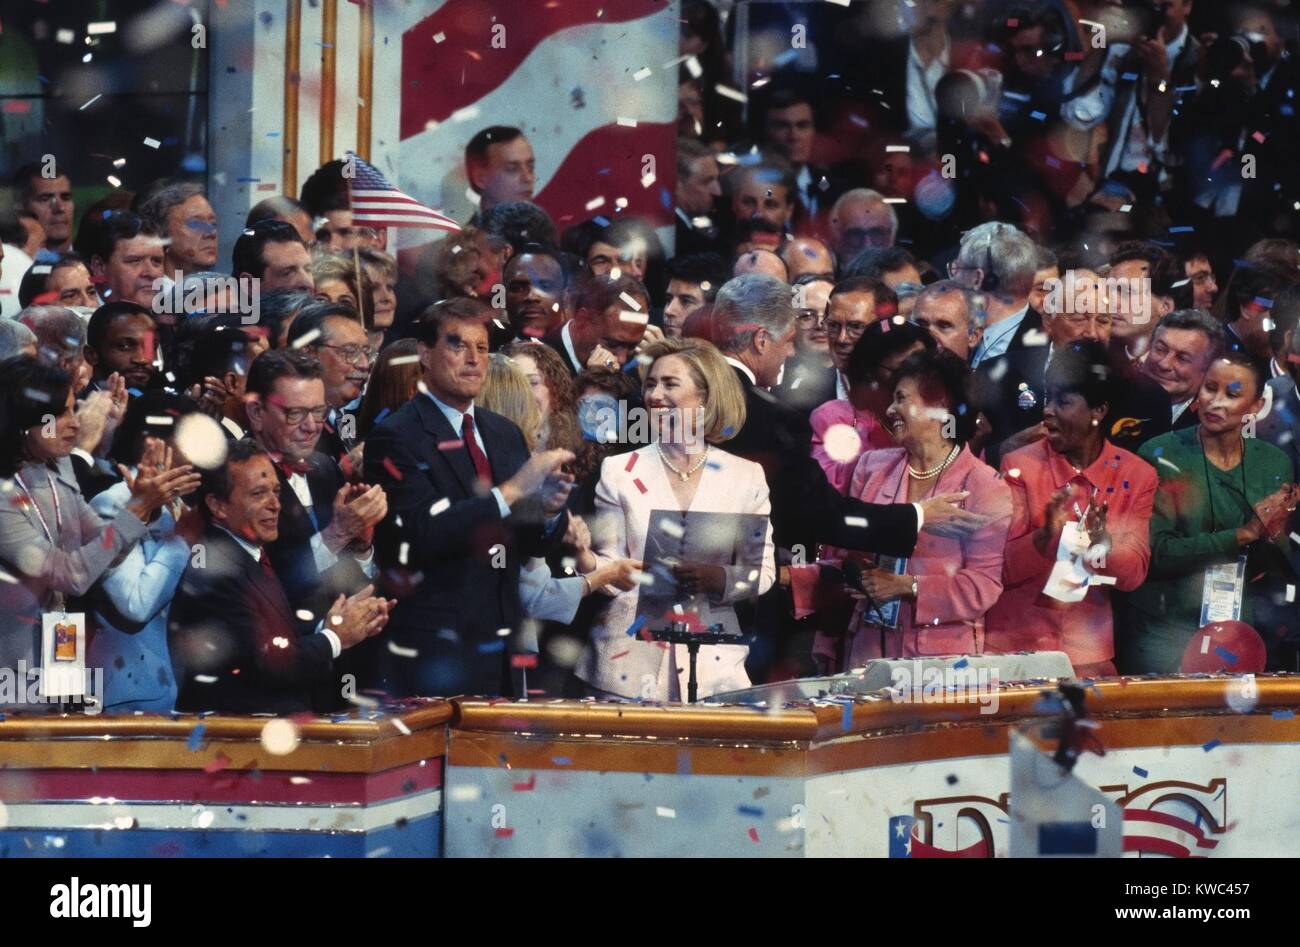 1996 Democratic National Convention in Chicago, Aug. 26-29. President Bill Clinton, Hillary Clinton, Vice President Al Gore, Senator Paul Simon and others on stage celebrating the nomination of Bill Clinton. (BSLOC_2015_14_81) Stock Photo